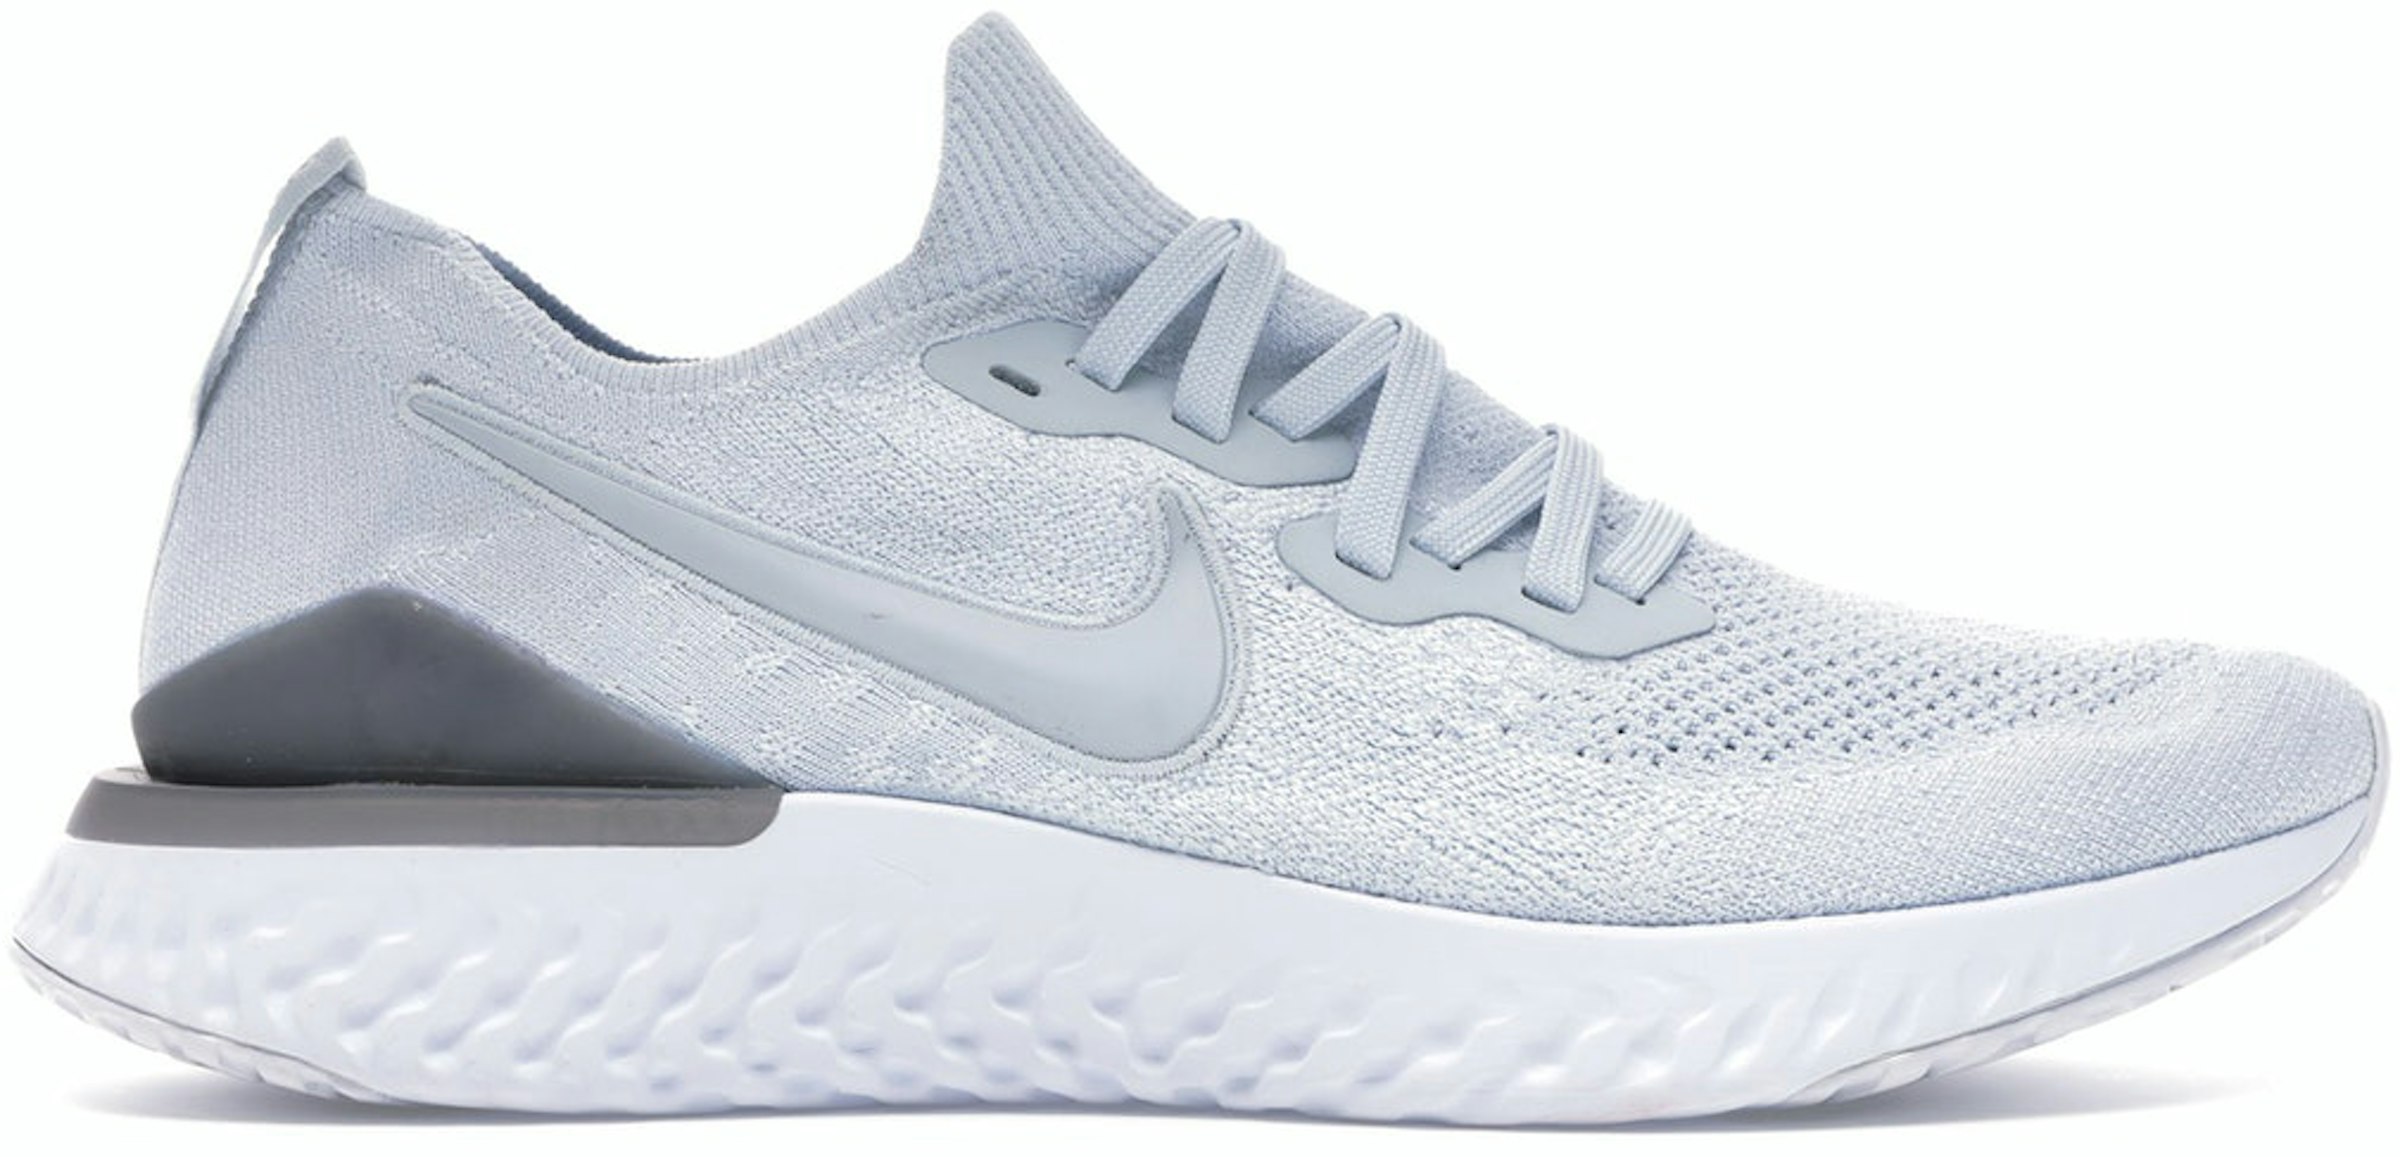 Agnes Gray Ese Dinkarville Nike Epic React Flyknit 2 Pure Platinum - BQ8928-004 - US